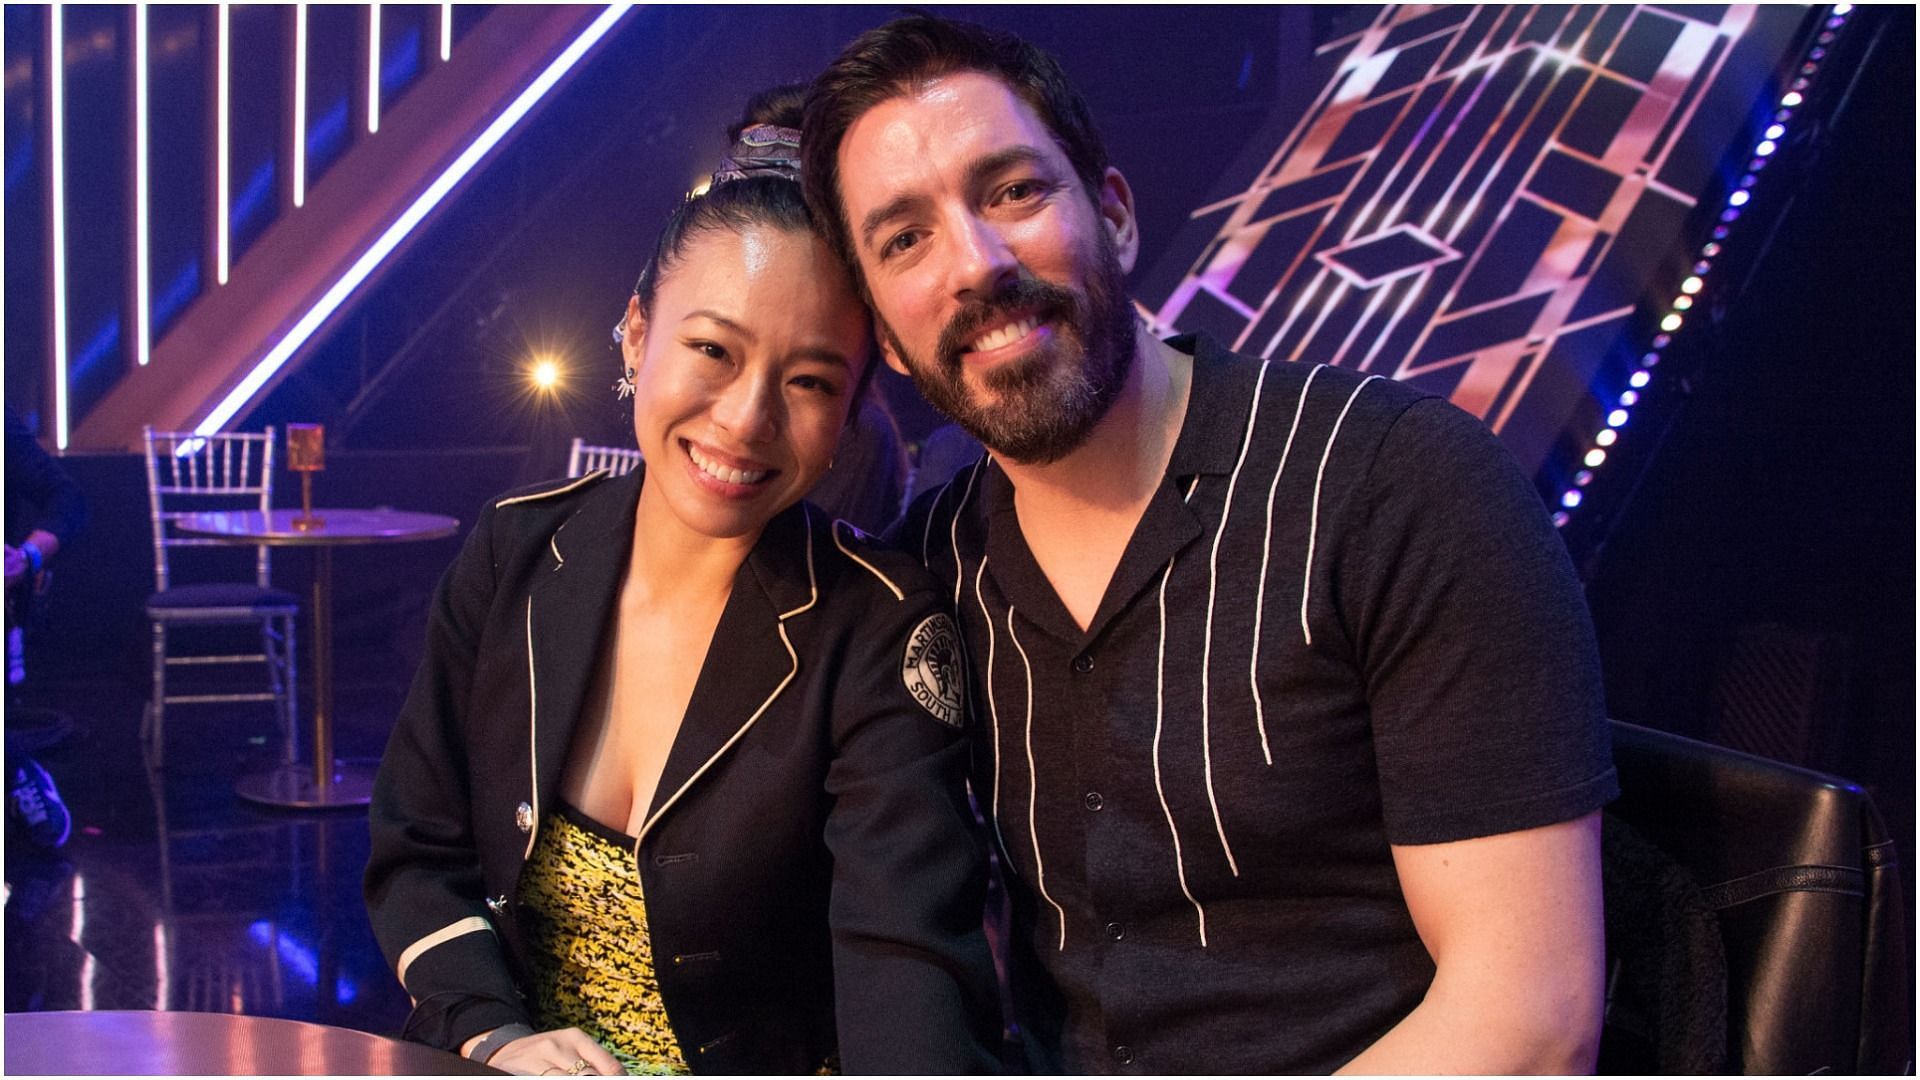 Drew Scott and Linda Phan are preparing to welcome their first baby (Image by Eric McCandless via Getty Images)